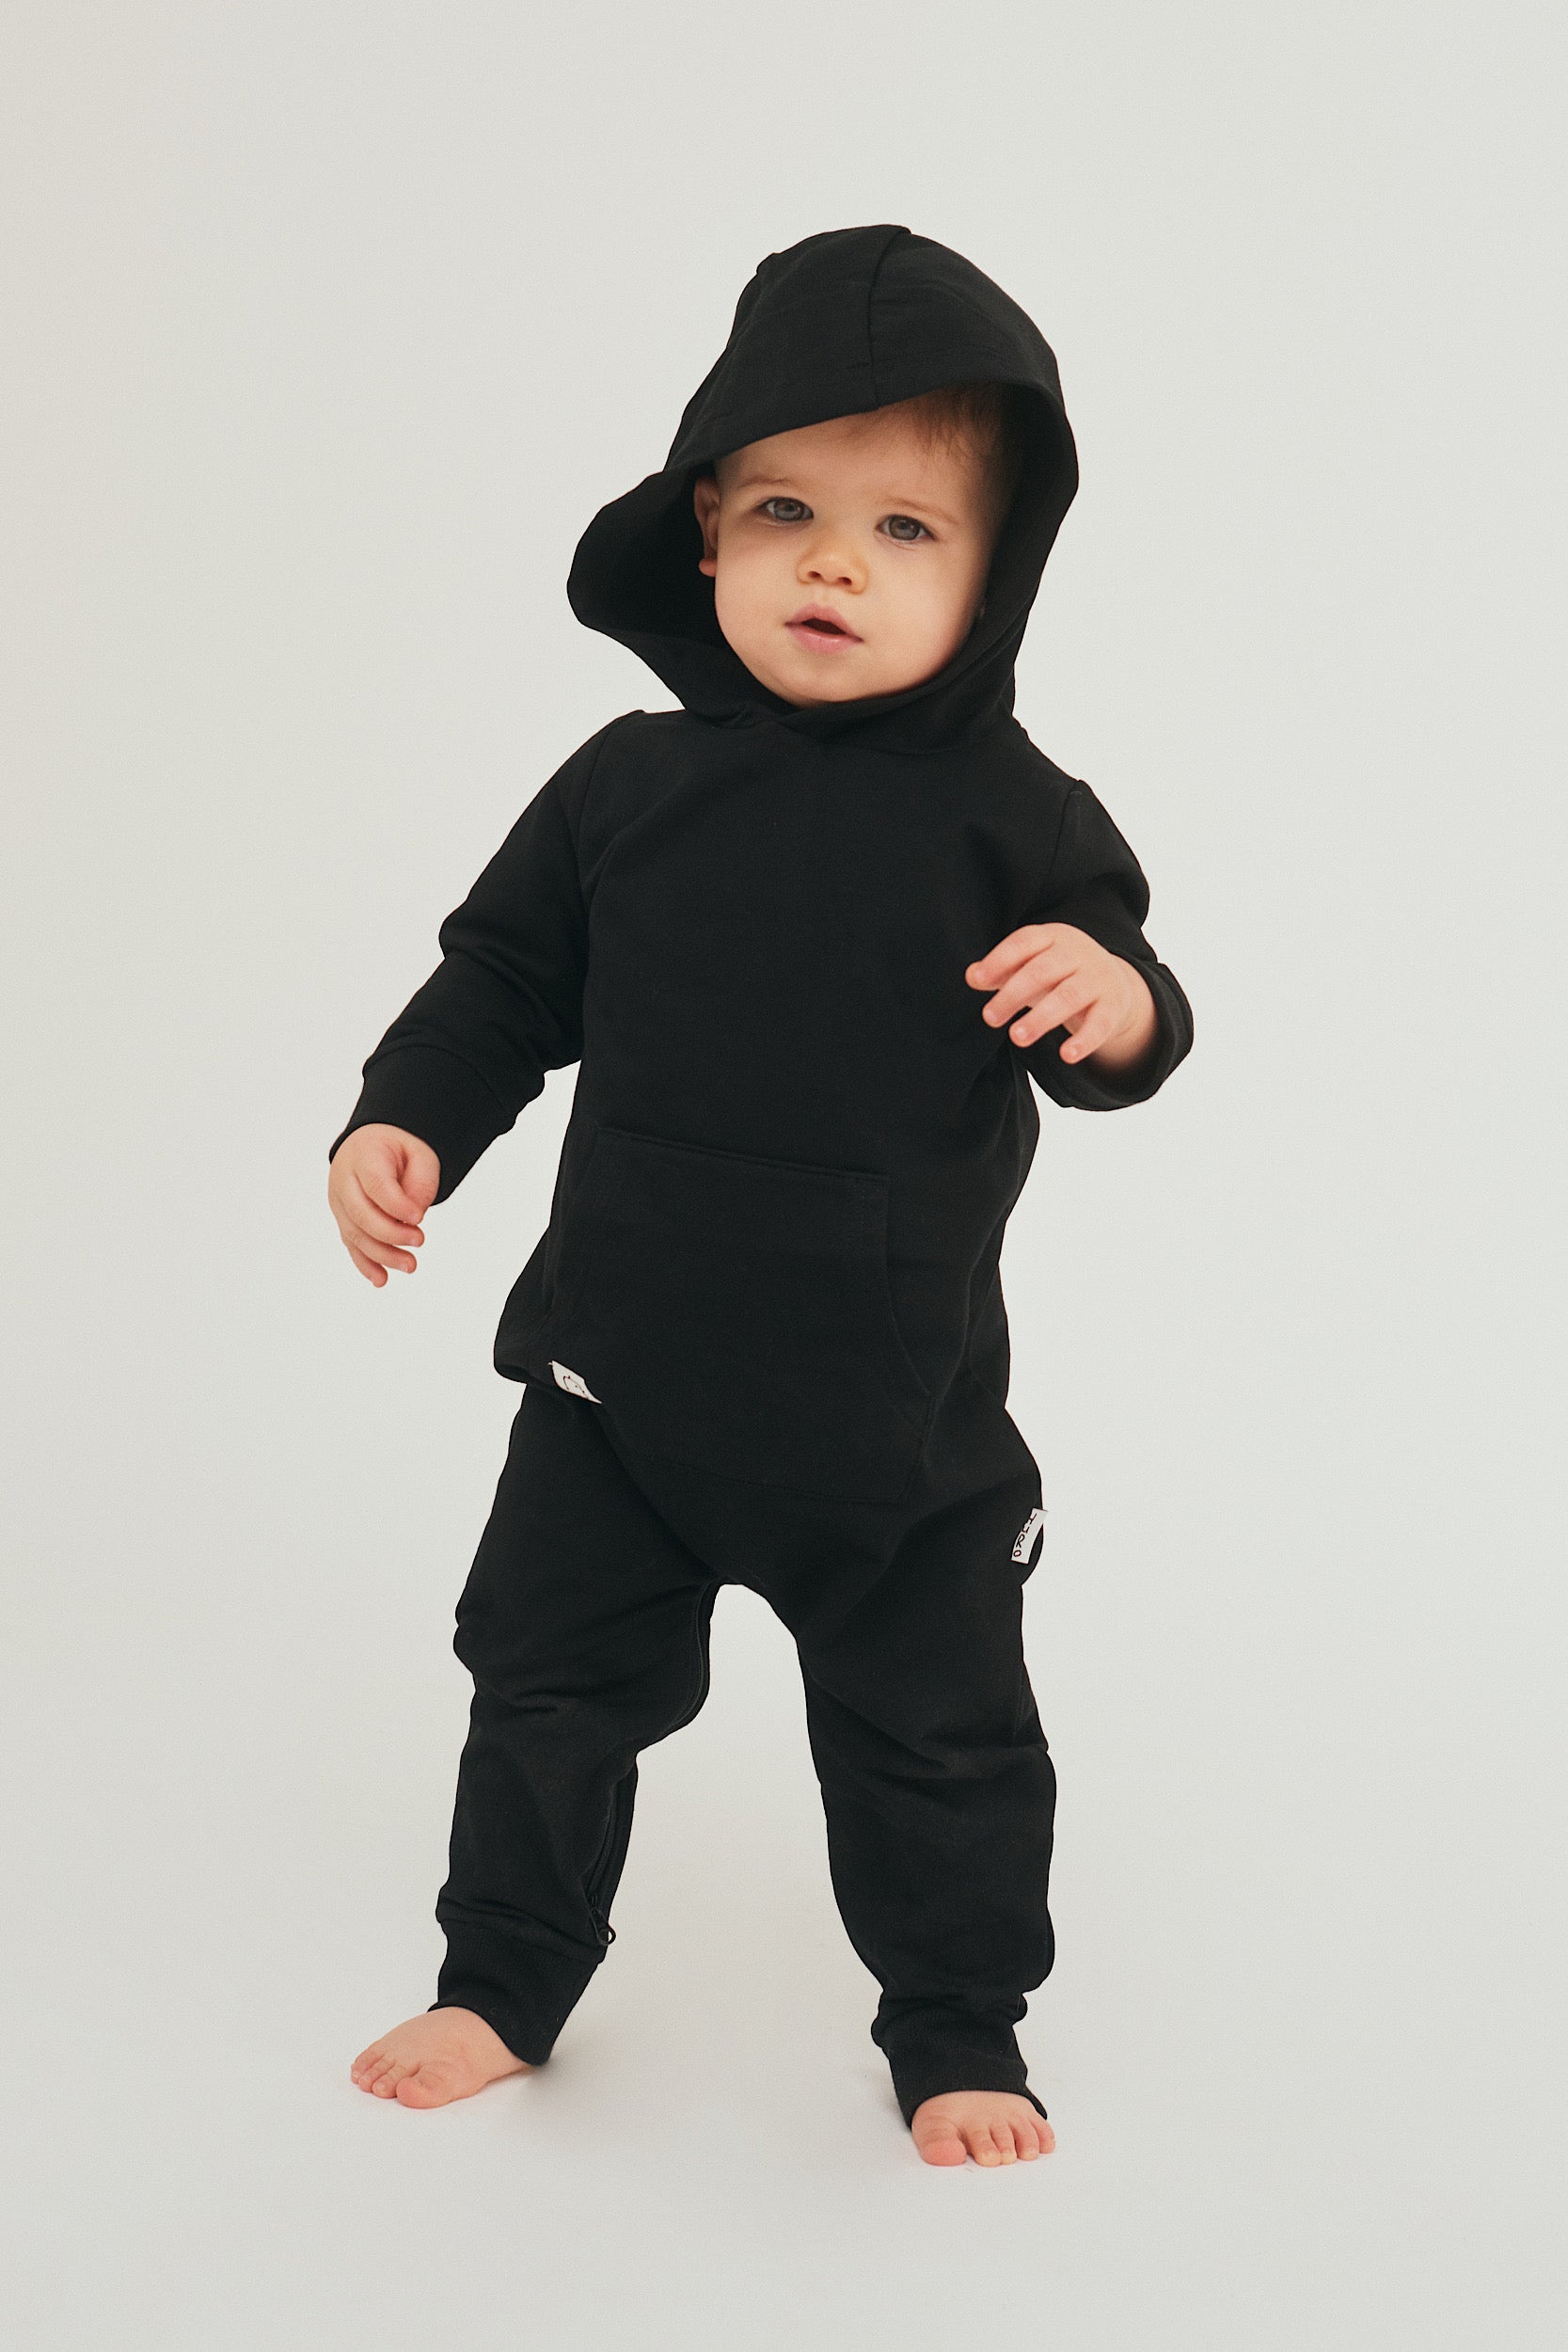 Hooded Zipper Romper, Best Baby Clothes, Favorite Baby ClothesHuRo Kids Leg to Leg Zipper Rompers, baby clothes canada, baby clothes USA, best baby clothes, toddler clothes, baby romper, baby clothes canada, baby romper